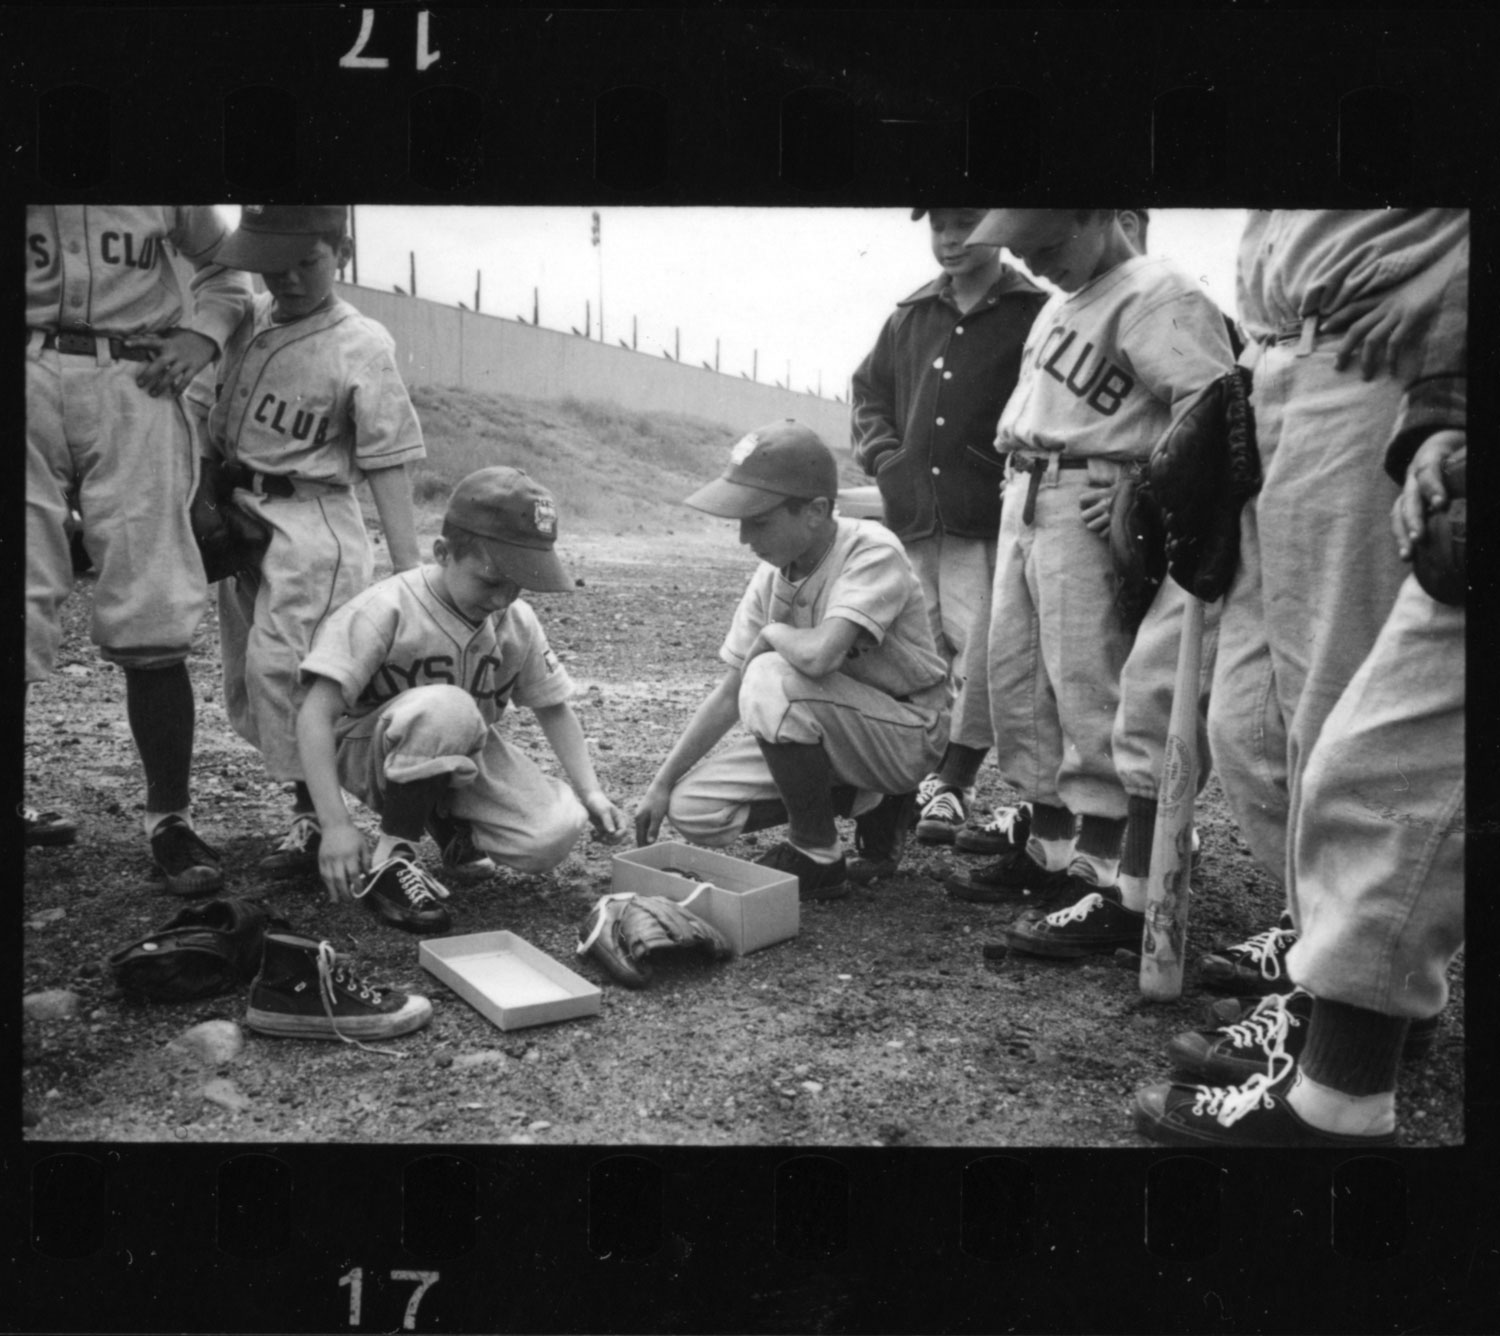 Players trying on cleats during the 1954 Manchester, New Hampshire, Little League season.